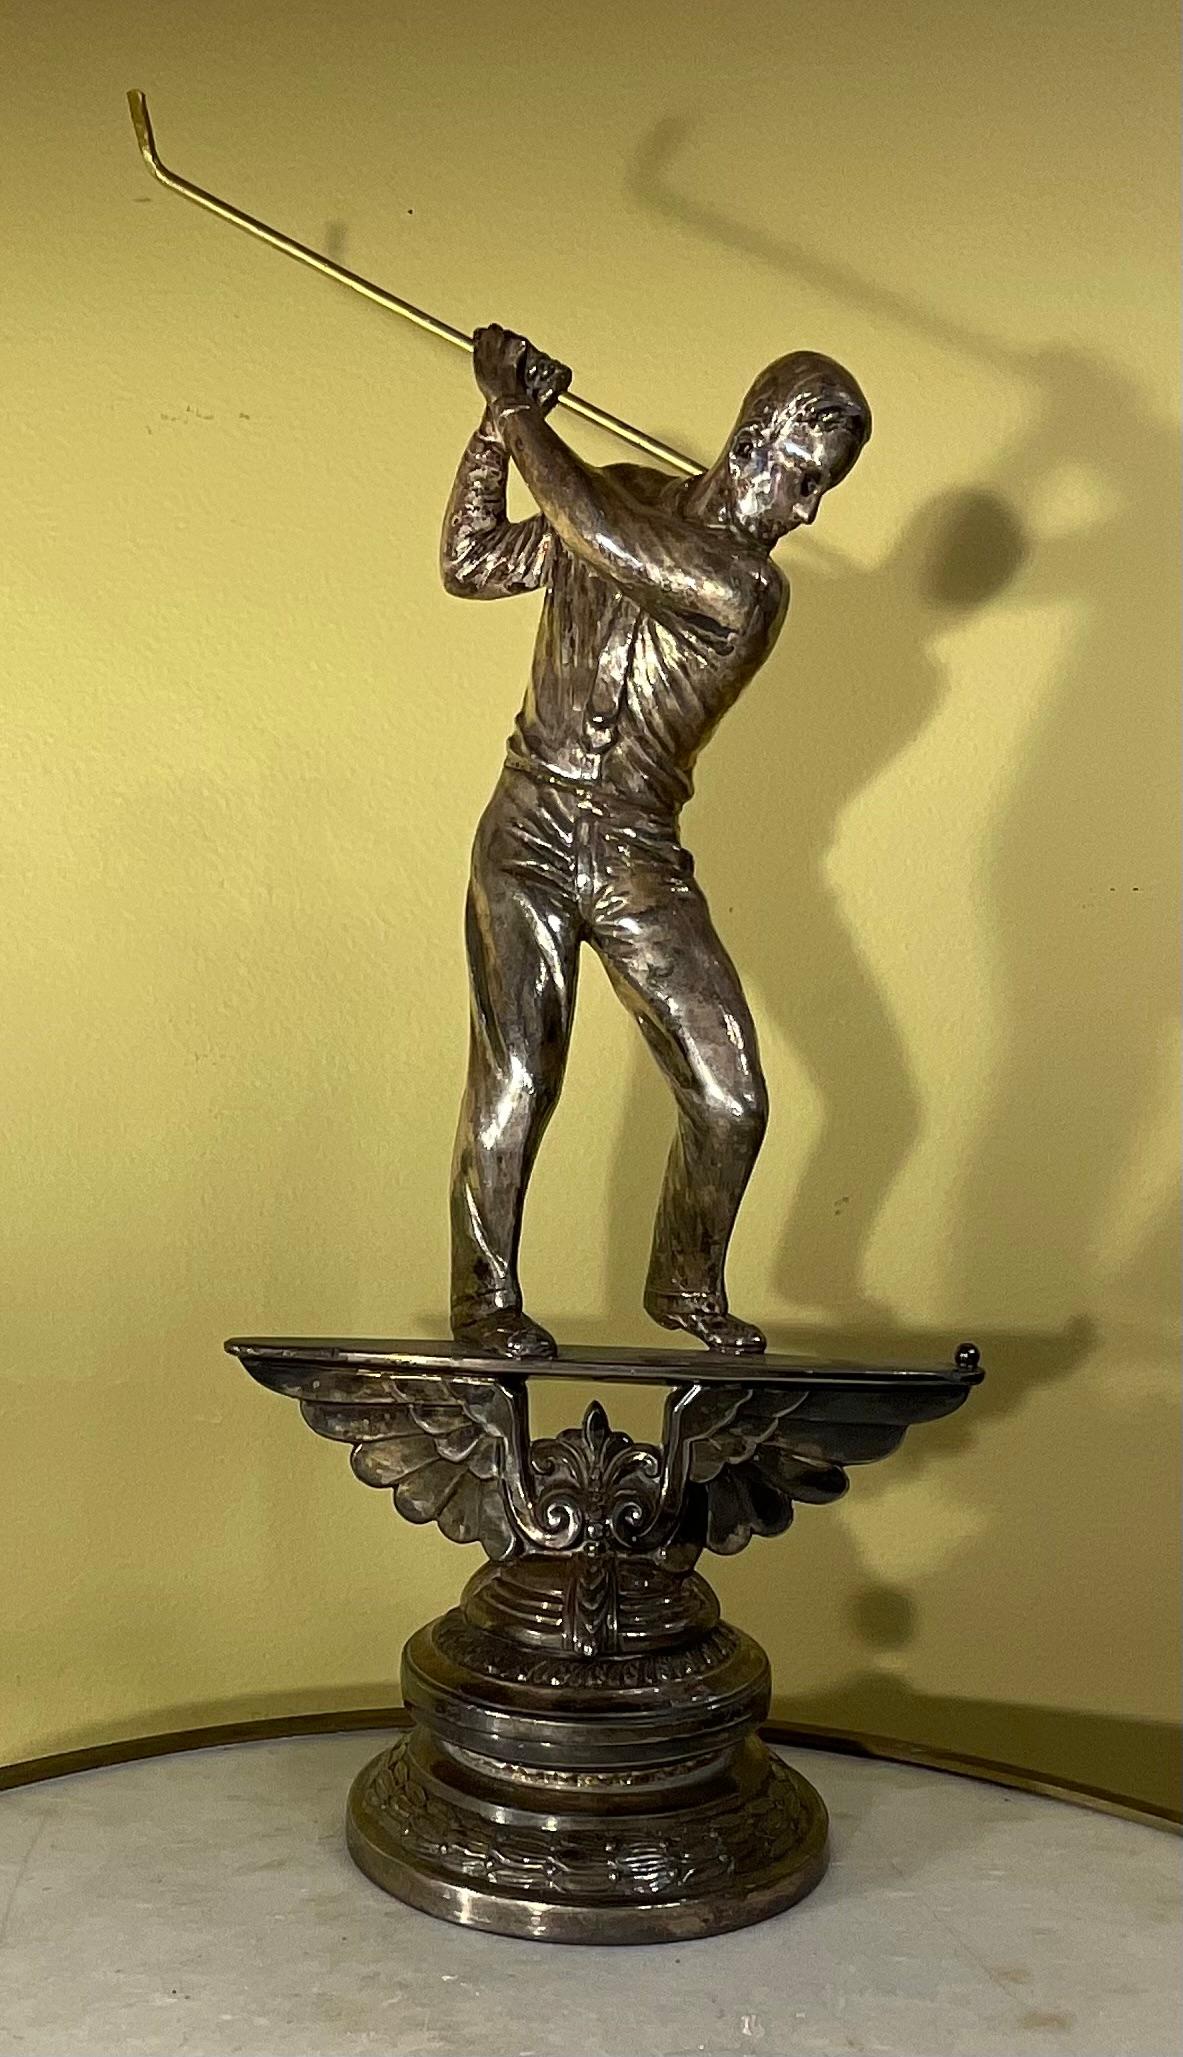 American Hand Chased Silverplate Golf Figurine, very nice decorated heavy base . 
Great decorative piece for any room .